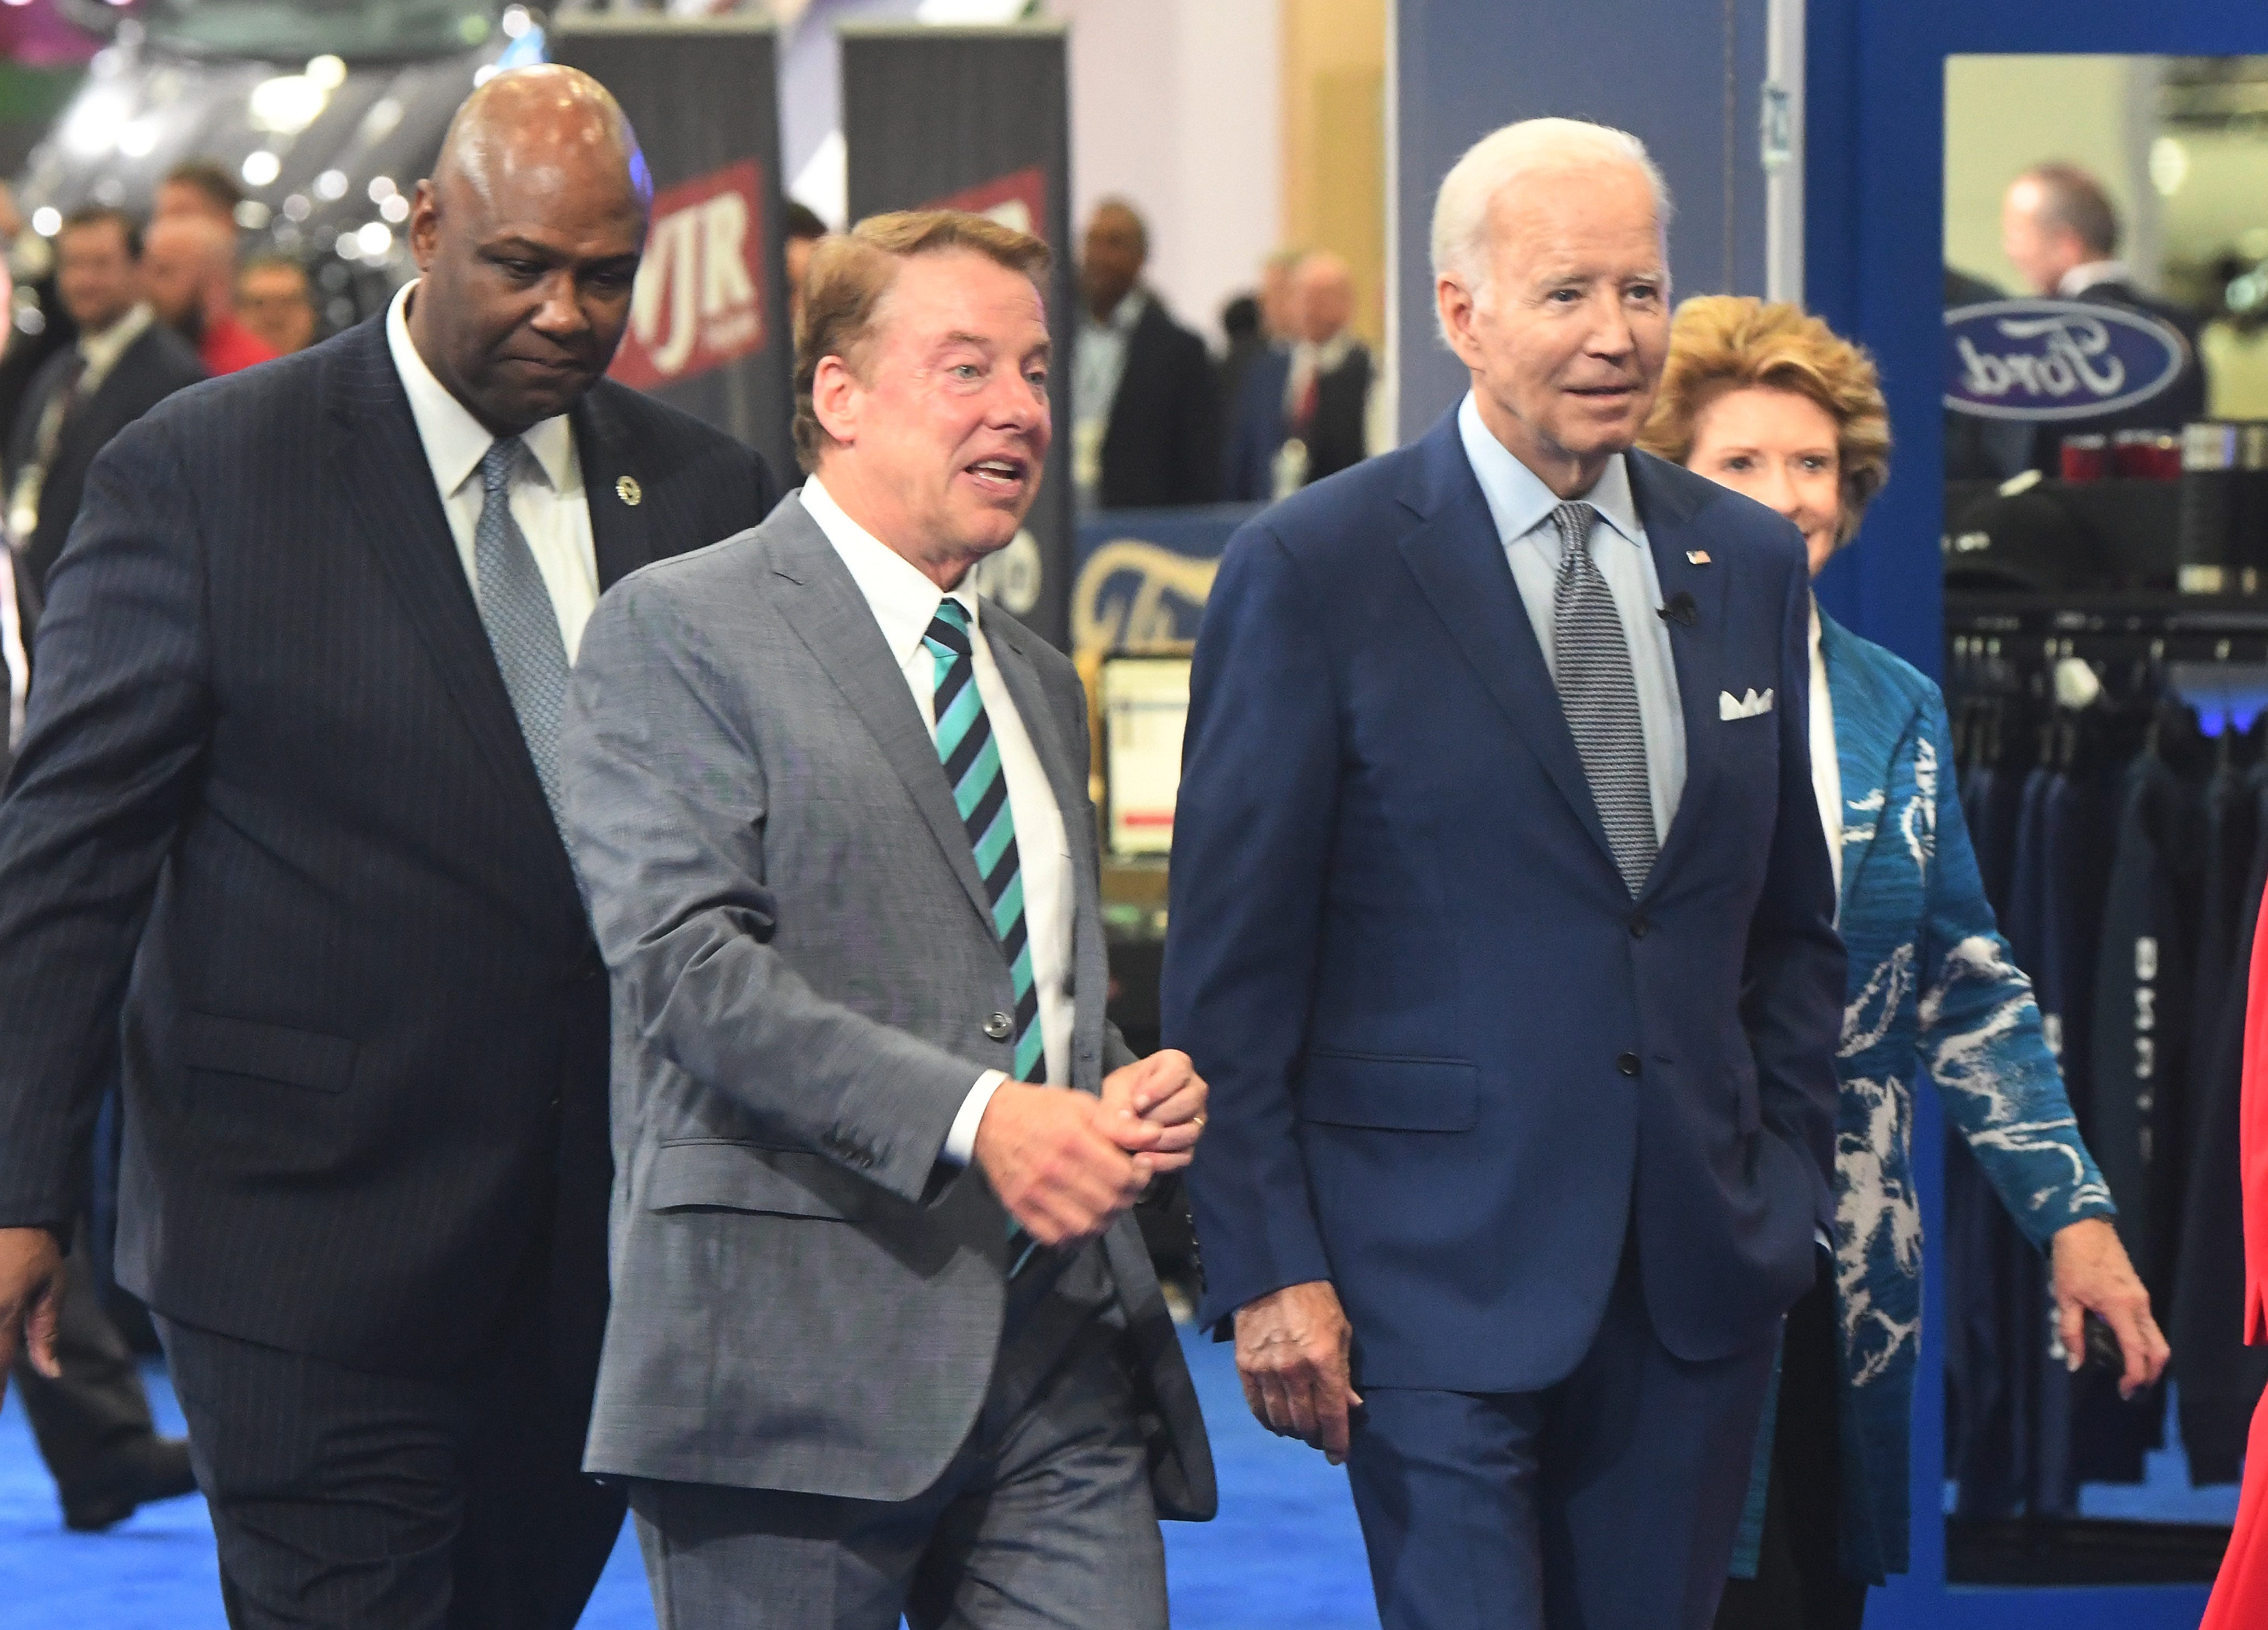 Executive Chair of Ford Motor Company William Clay Ford Jr. shows President Joe Biden the Ford display during a tour of the 2022 North American International Auto Show in Detroit, Michigan on September 14, 2022.